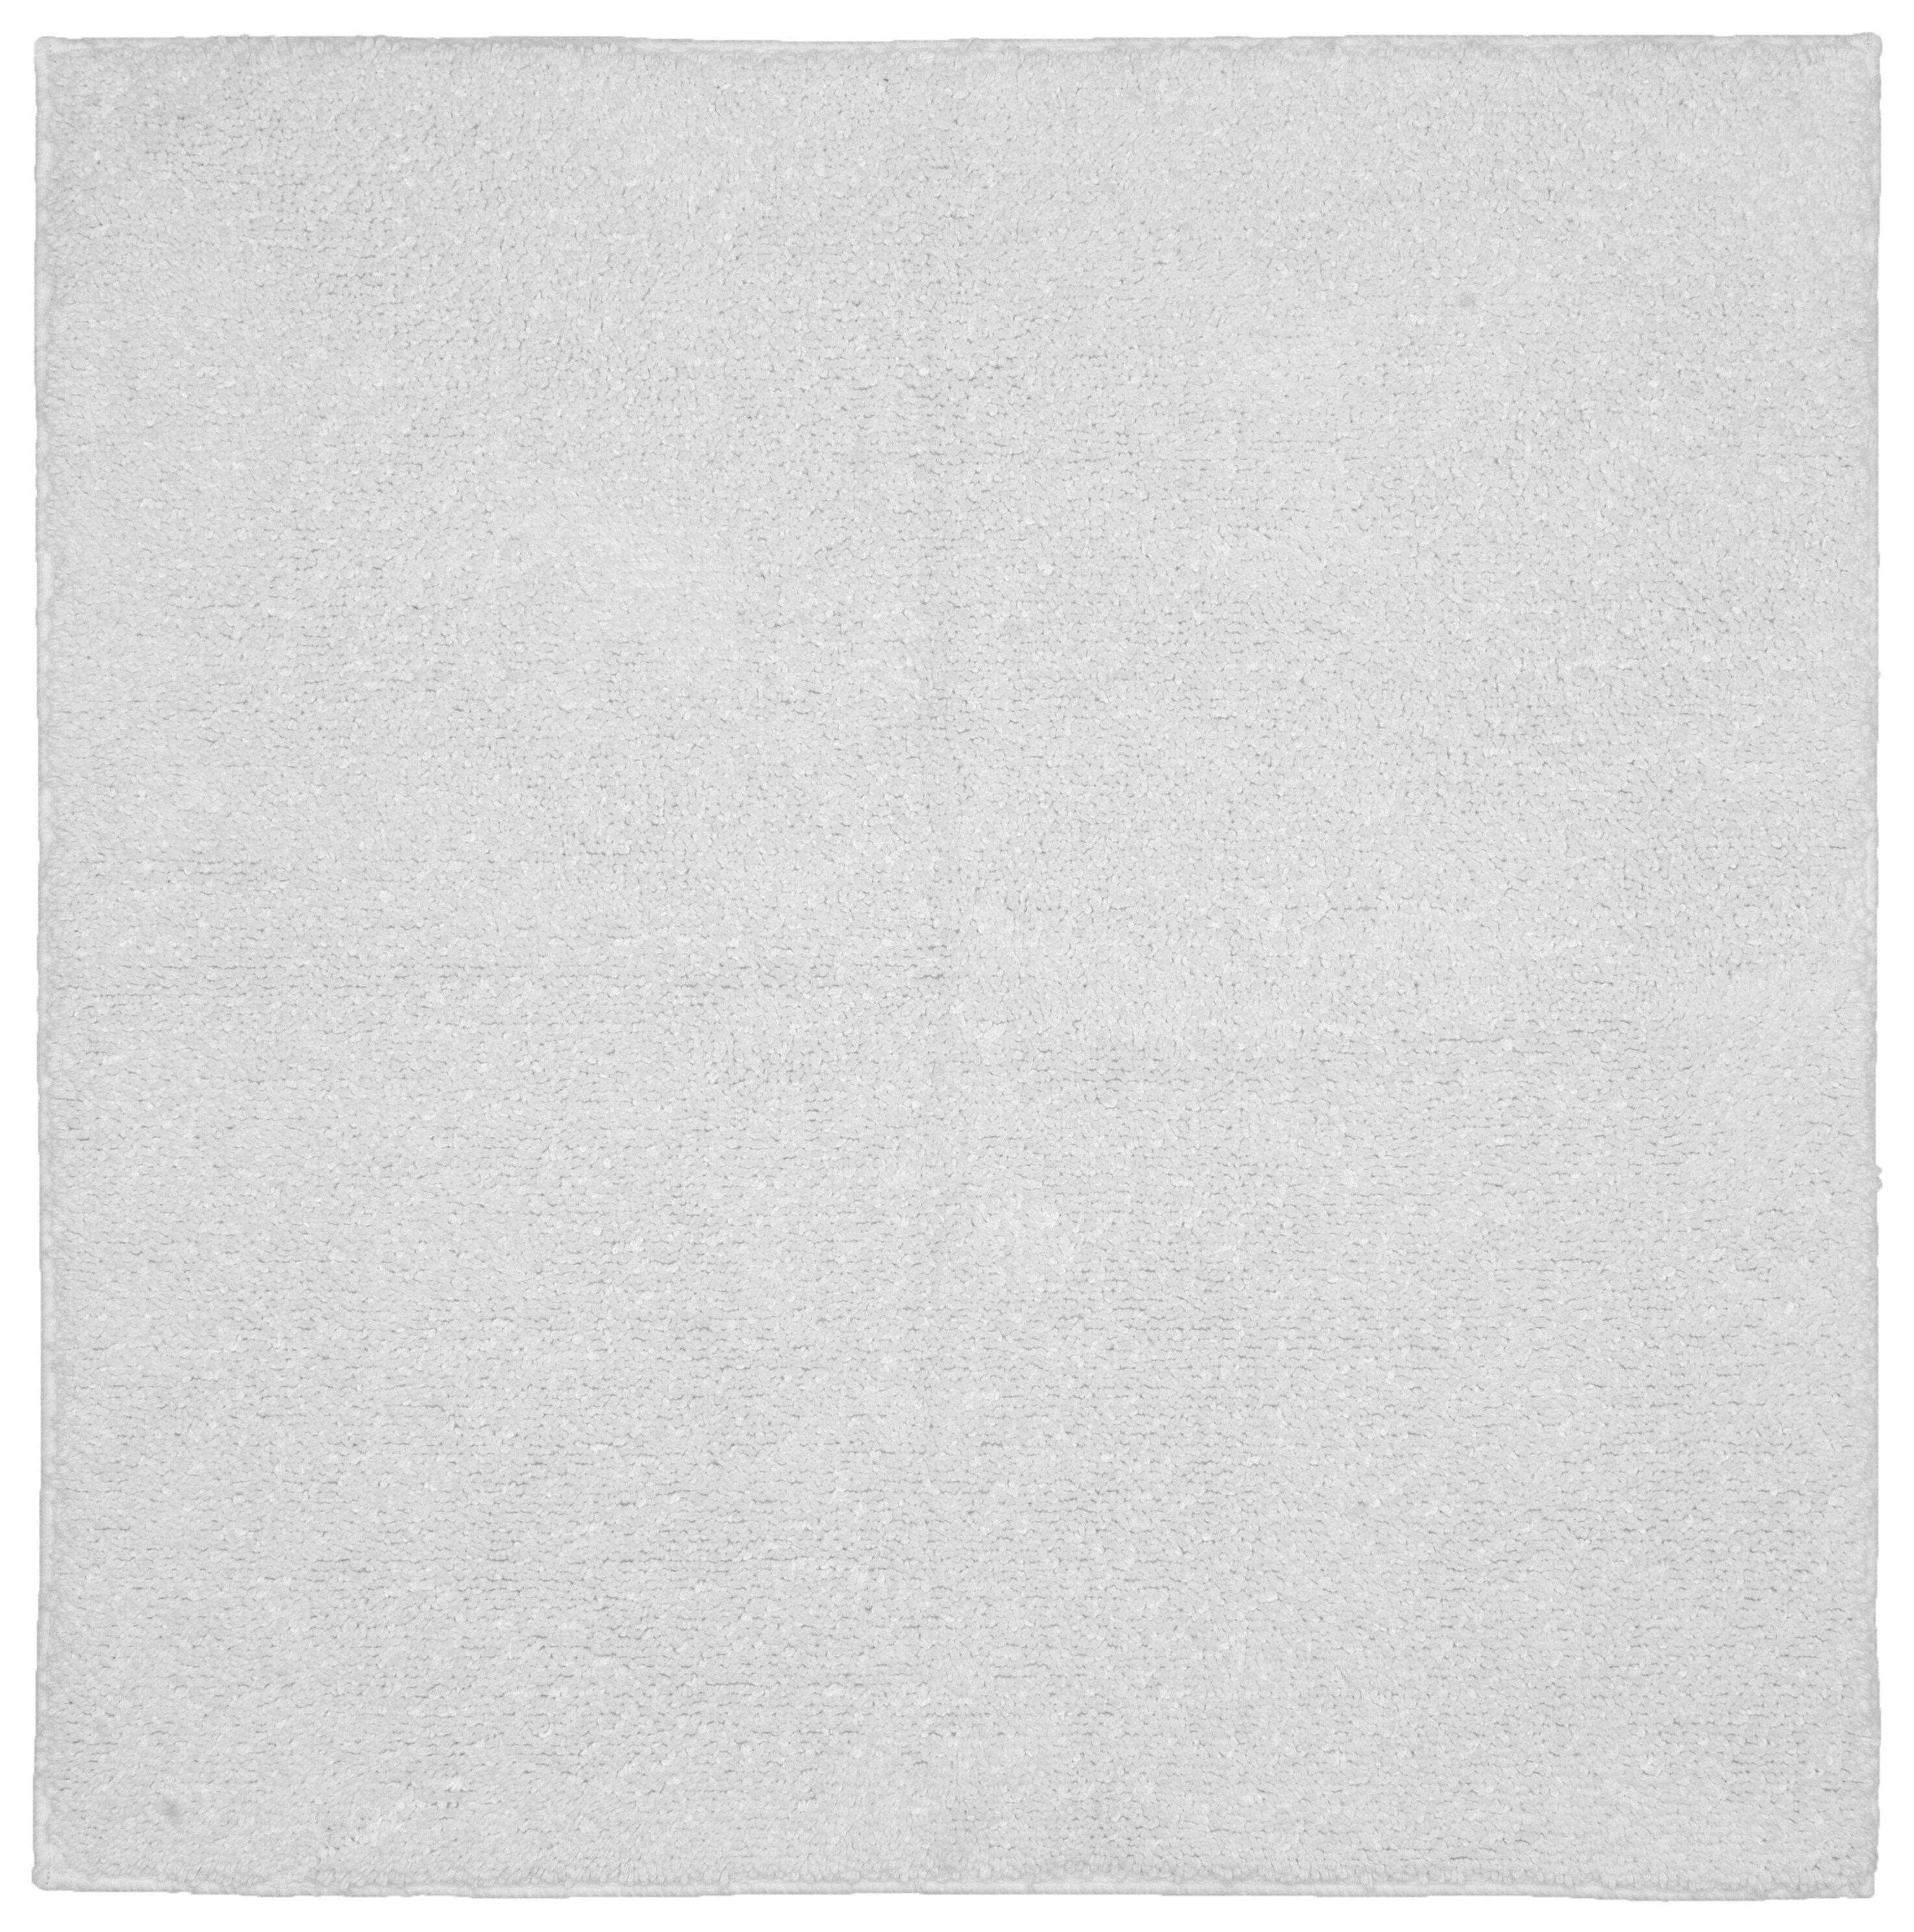 garland rug queen cotton washable rug, 24-inch by 40-inch, white